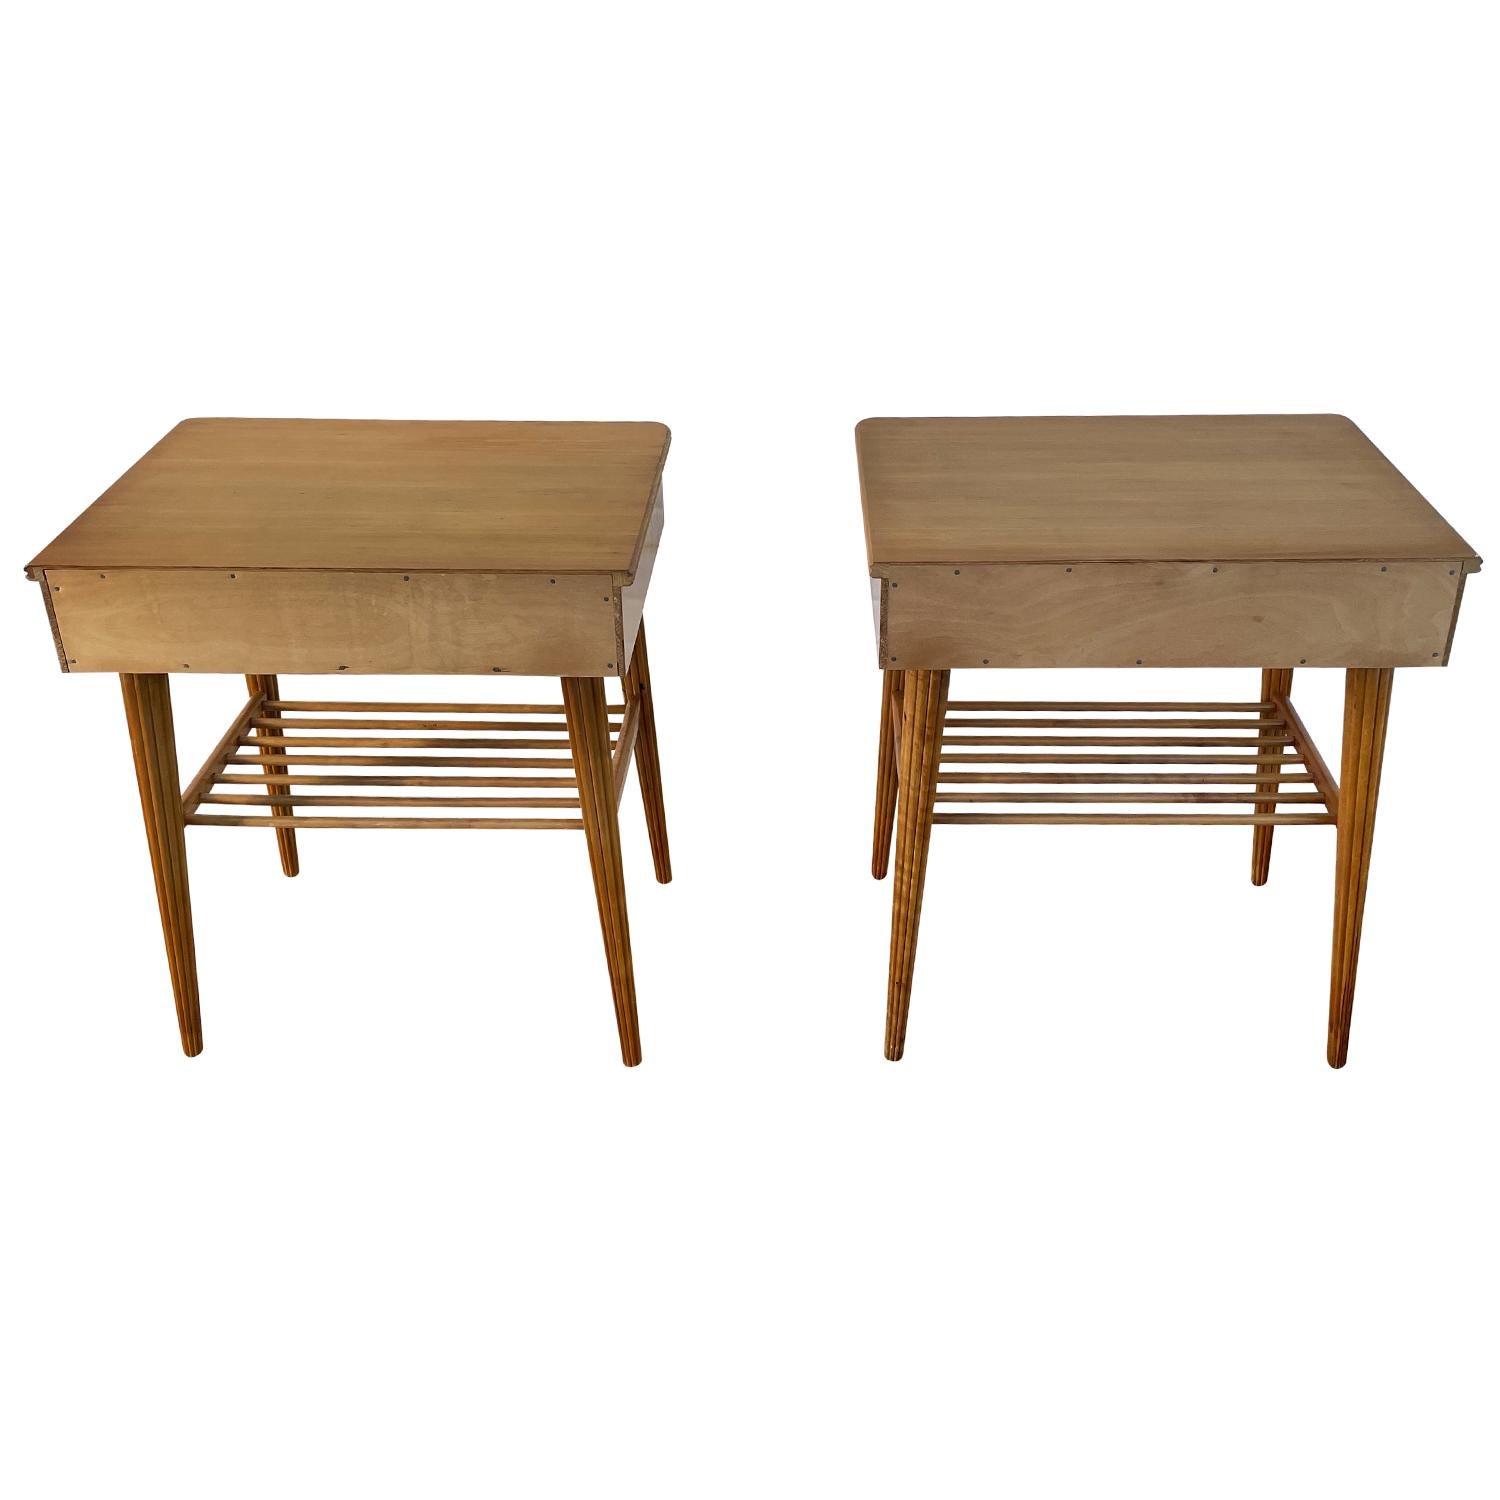 20th Century Danish Pair of Birchwood Nightstands - Vintage Brass Bedside Tables For Sale 1